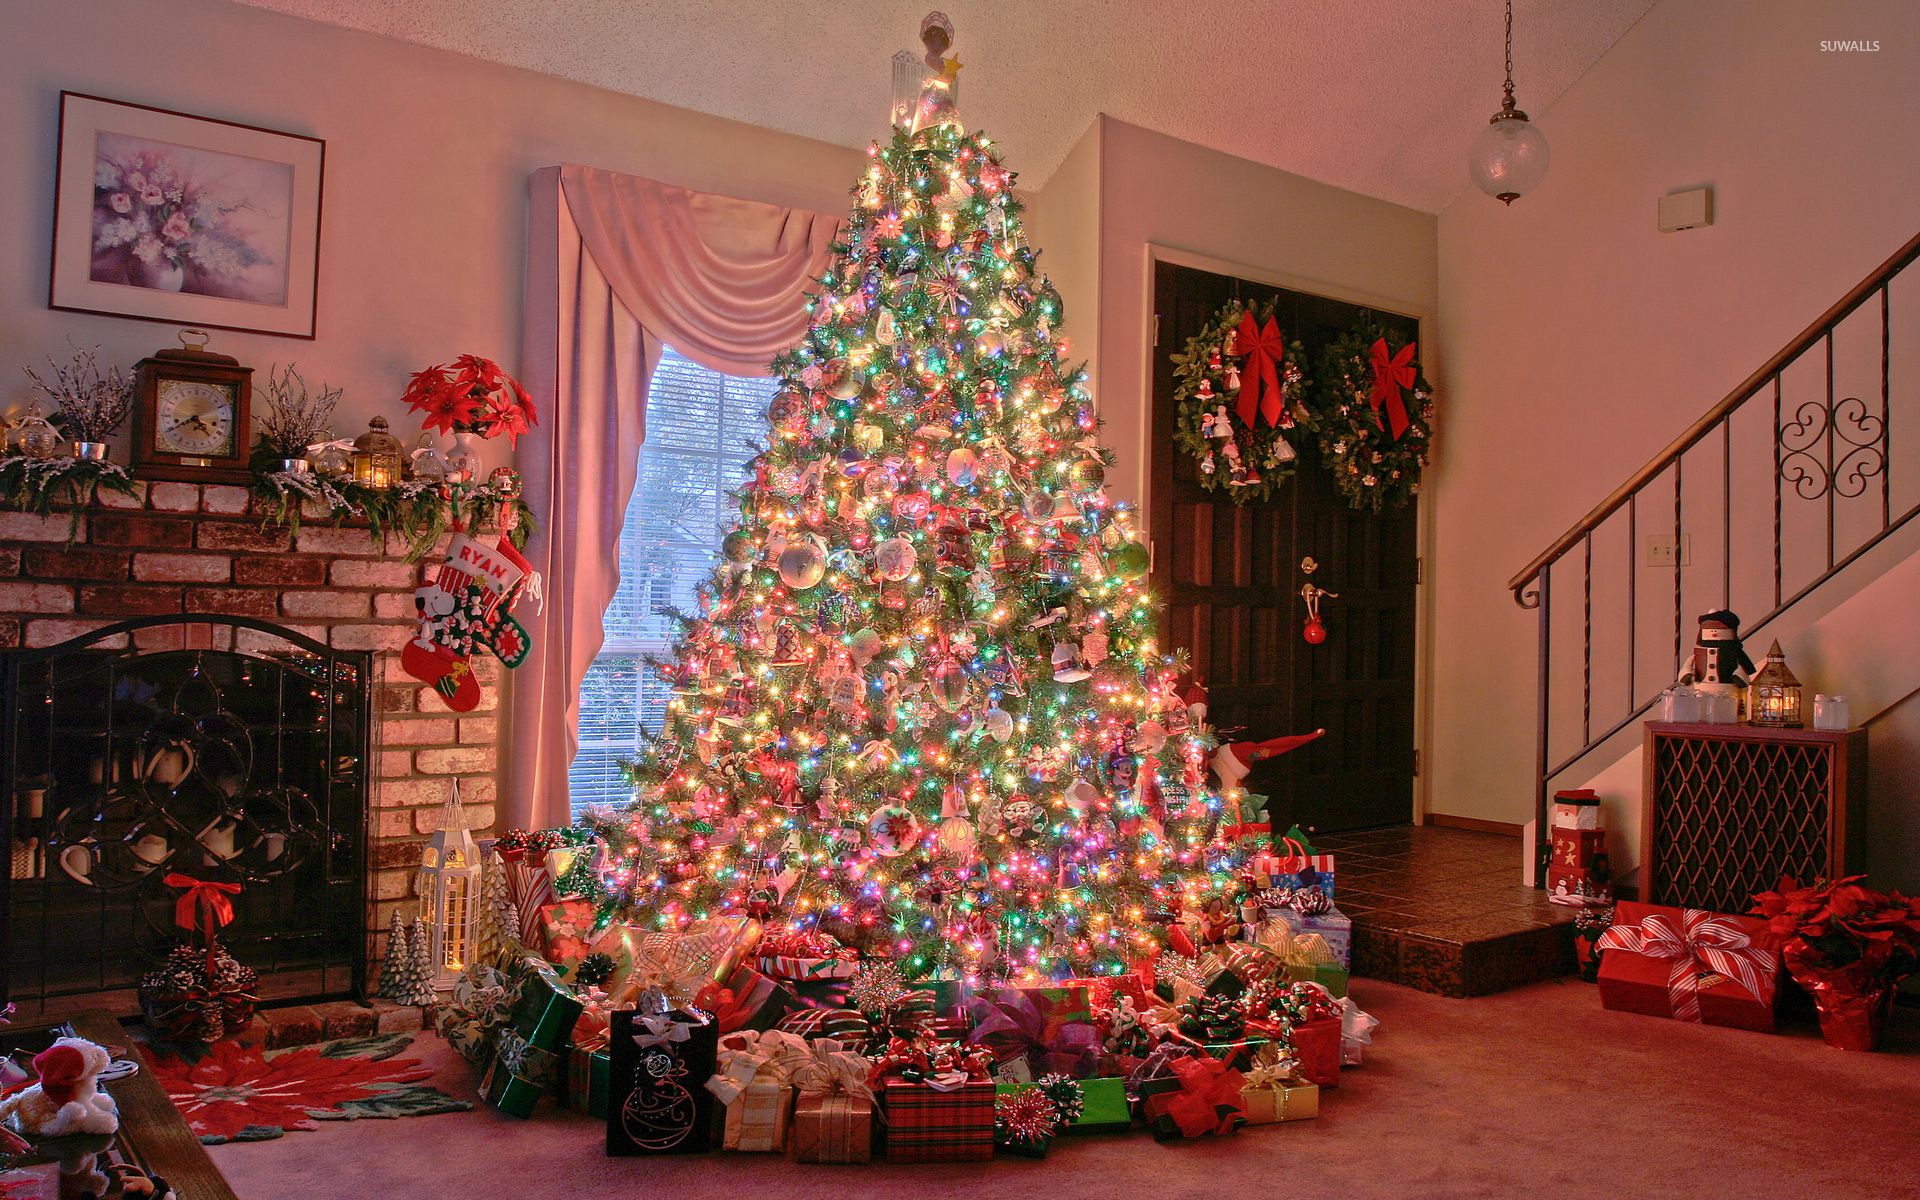 Many gifts under the glowing Christmas tree wallpaper wallpaper